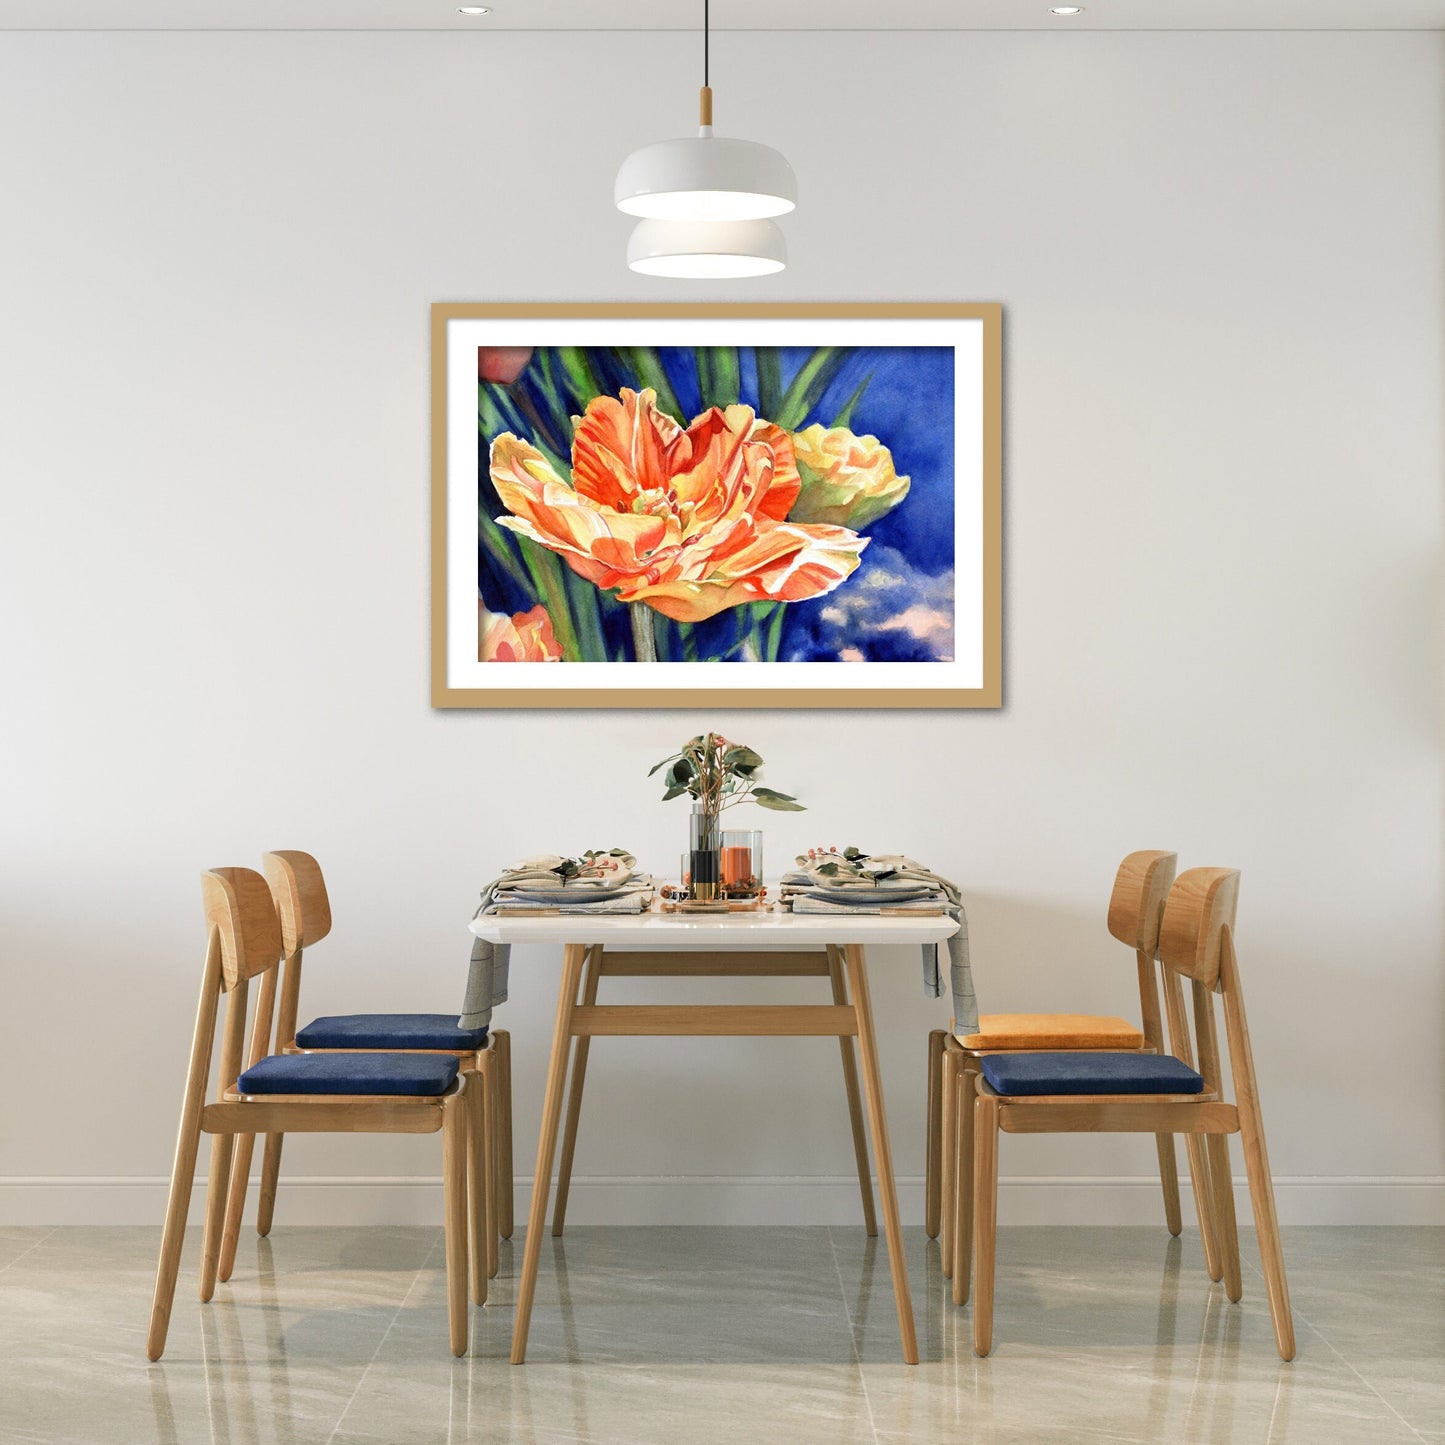 Oversized Wall Art, Tulip Painting, Watercolor Flowers, Tulip Bloom , Floral Wall Art, Living Room Art, Canvas Print